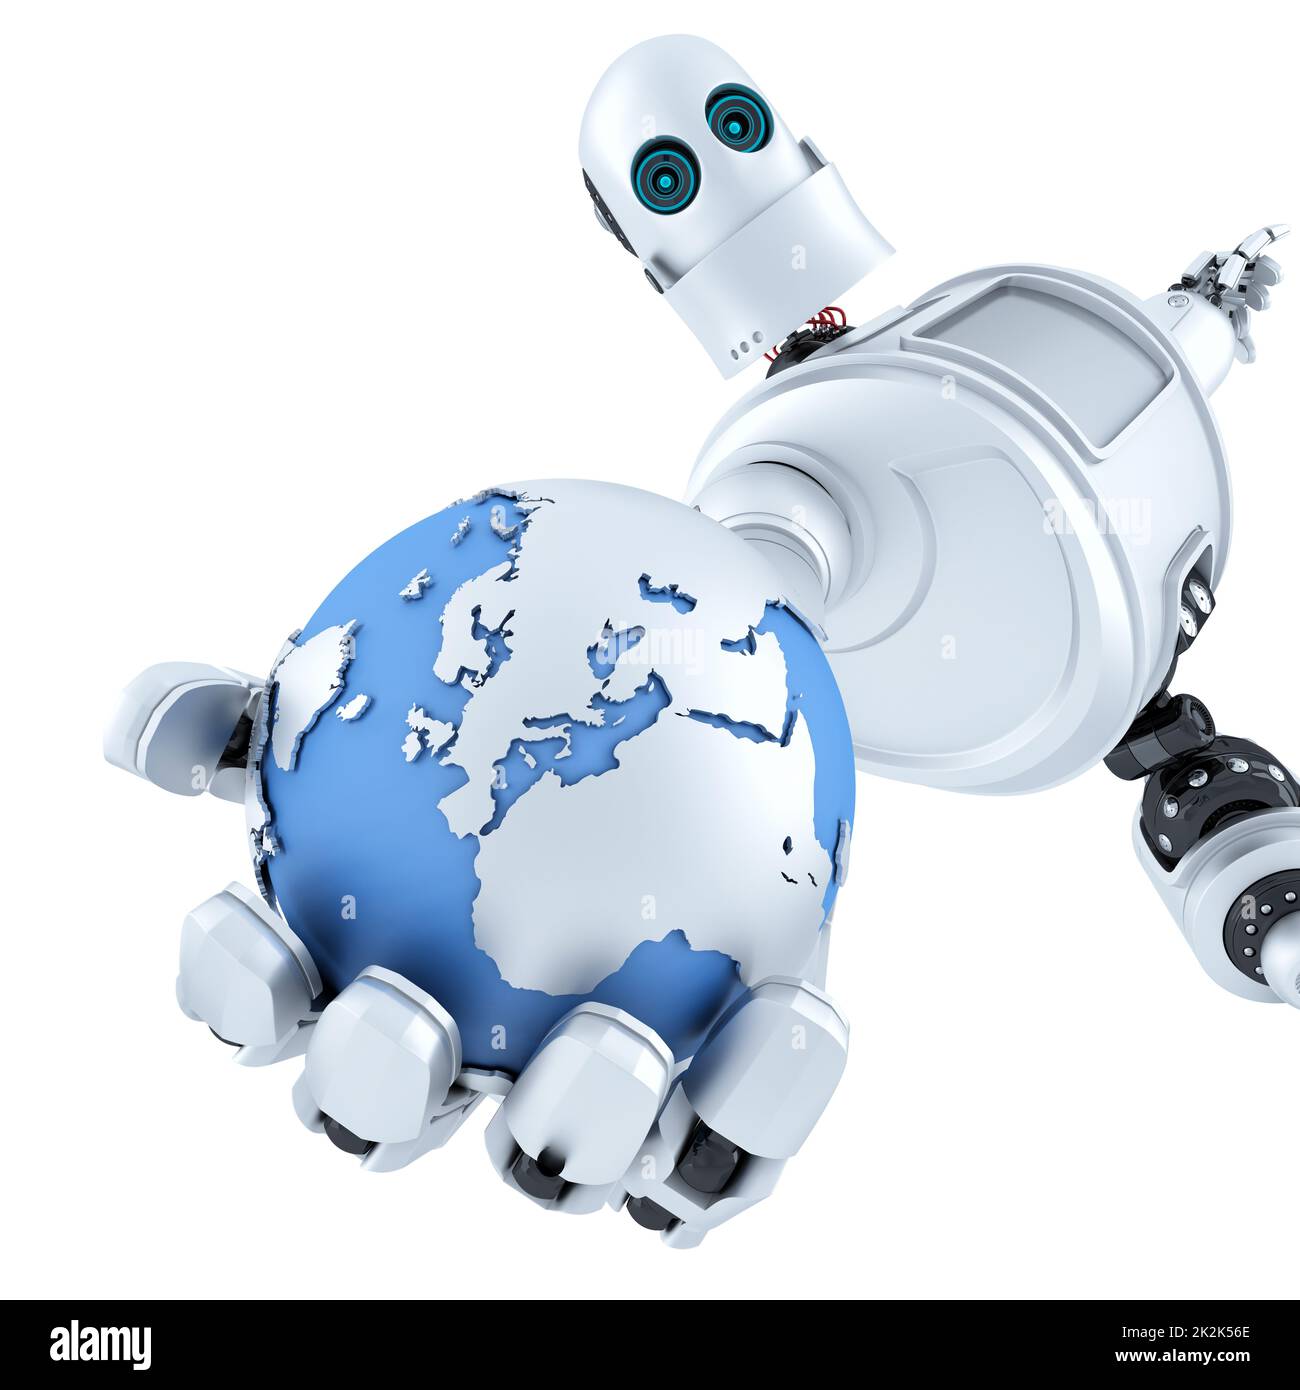 Globe in the hand of the robot. Technology concept. Isolated. Contains clipping path Stock Photo